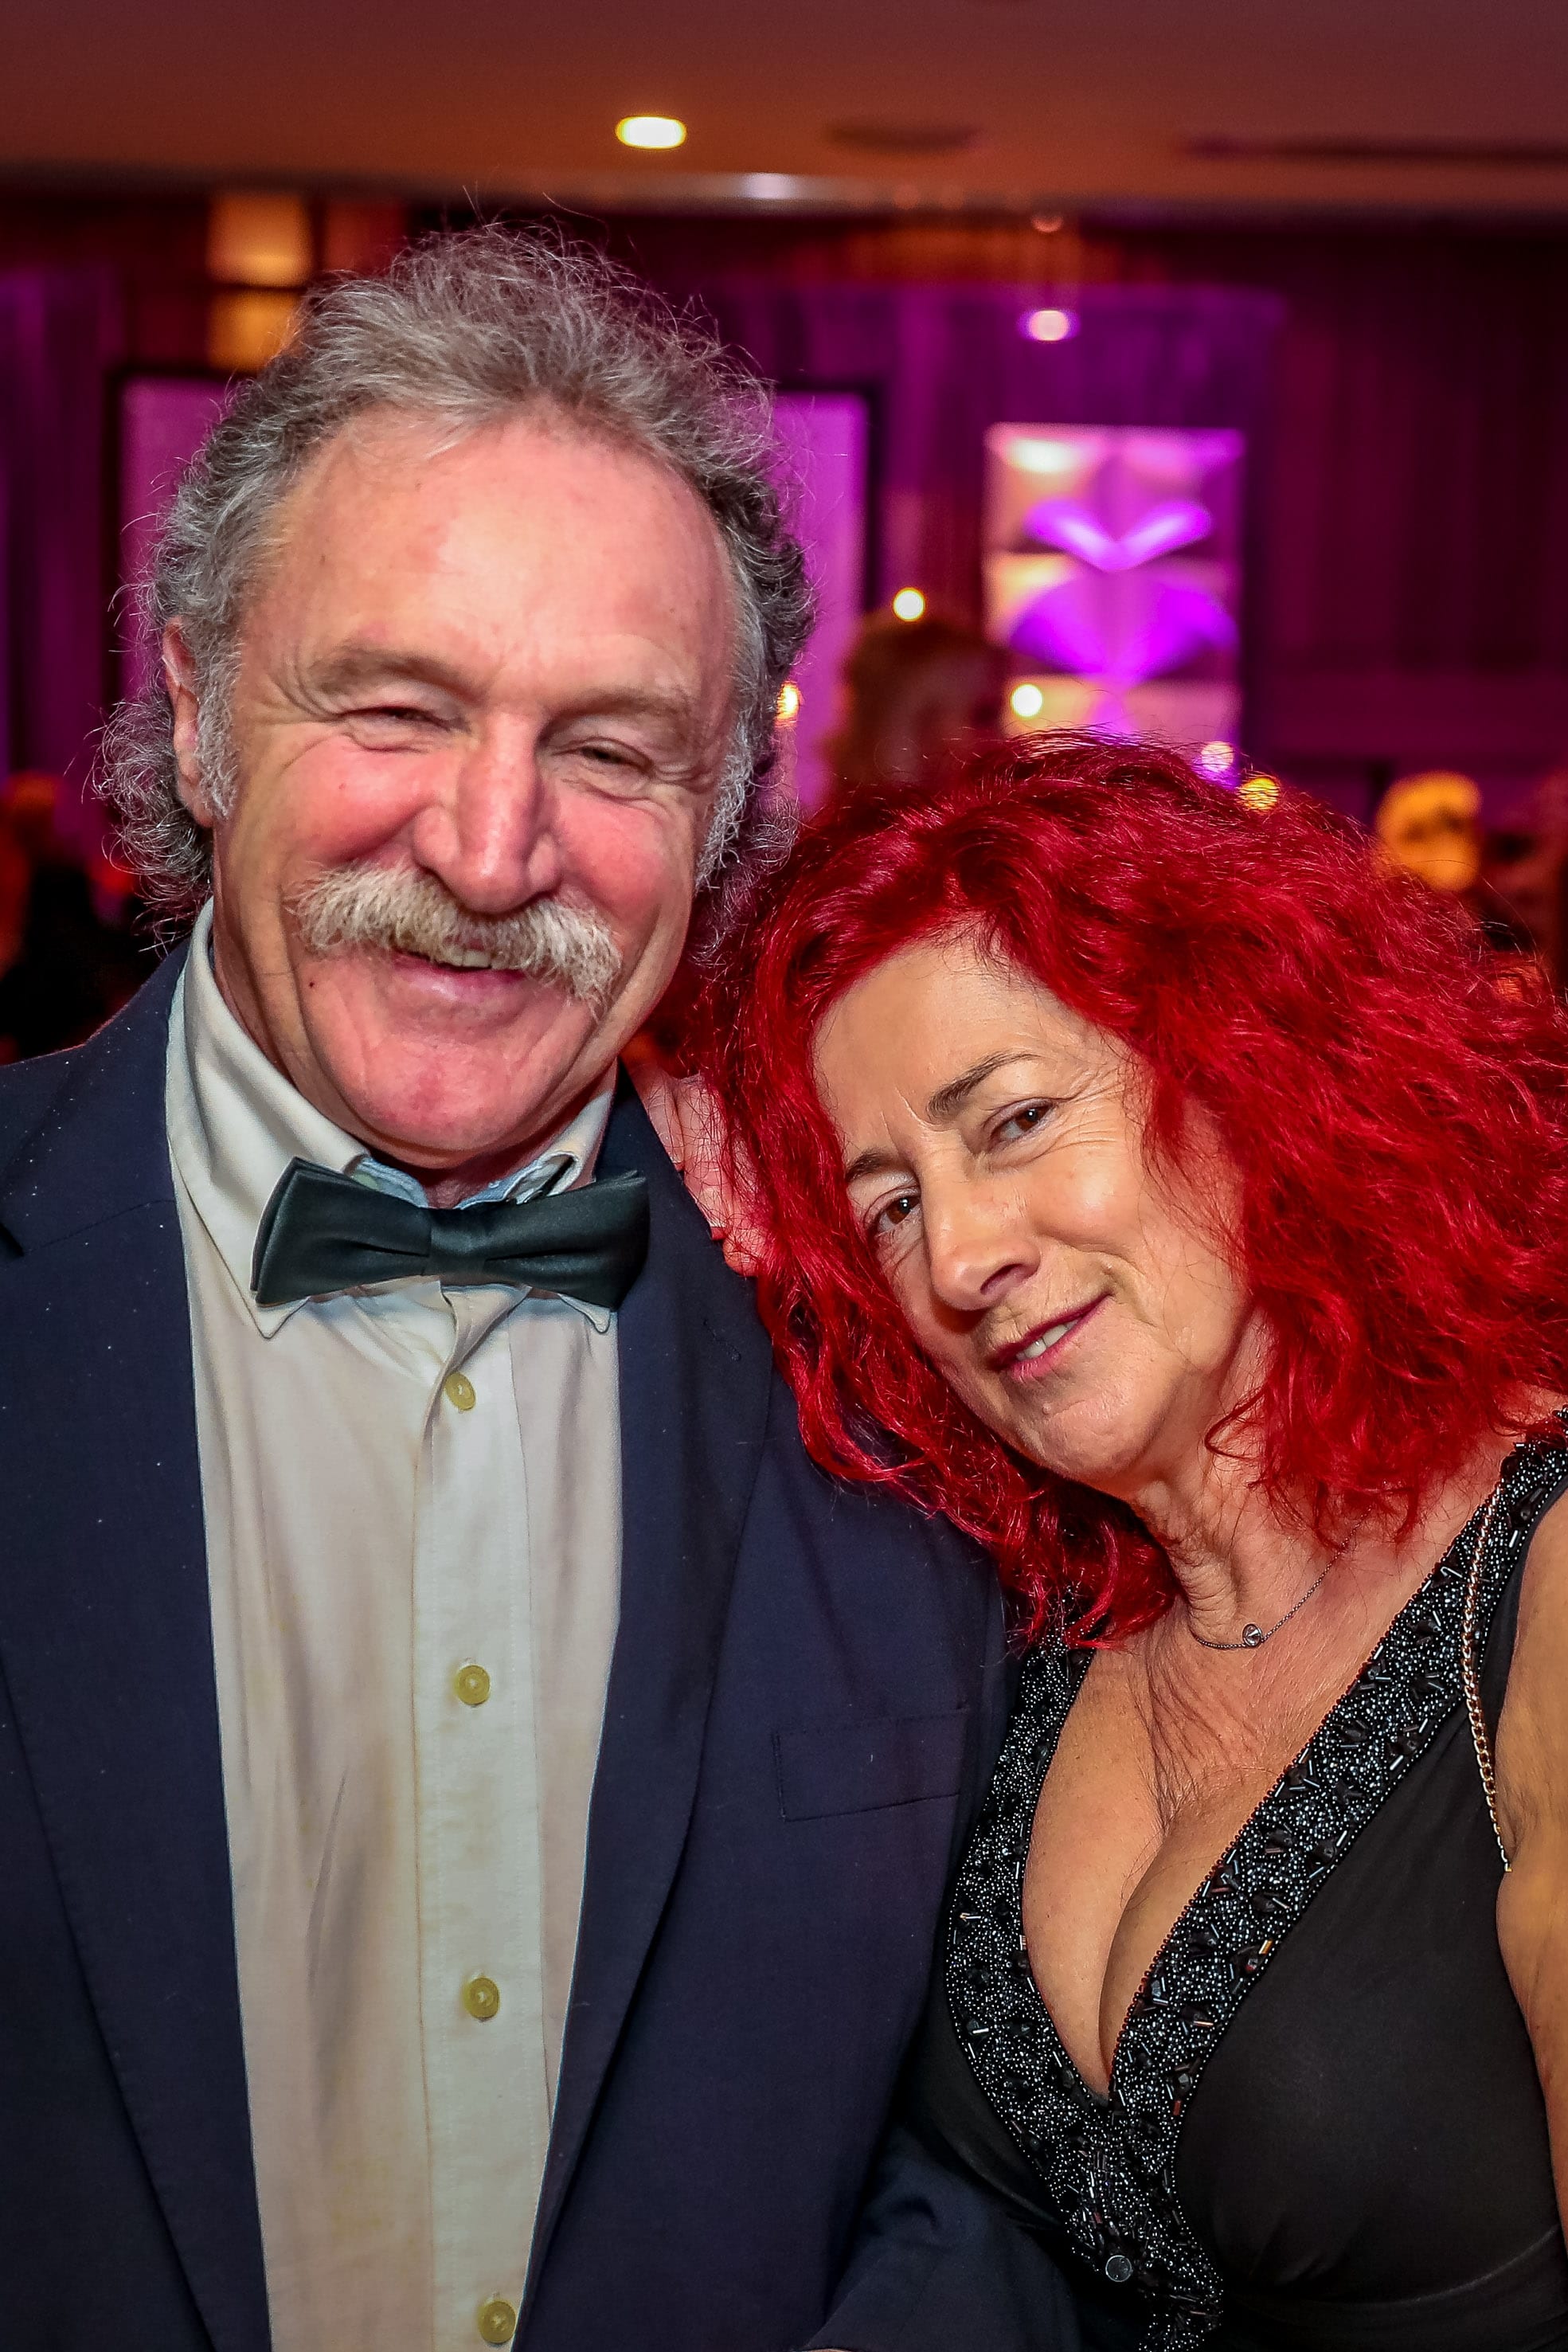 16-11-18 Limerick Chamber Presidents Awards in the Strand Hotel. Picture: Keith Wiseman